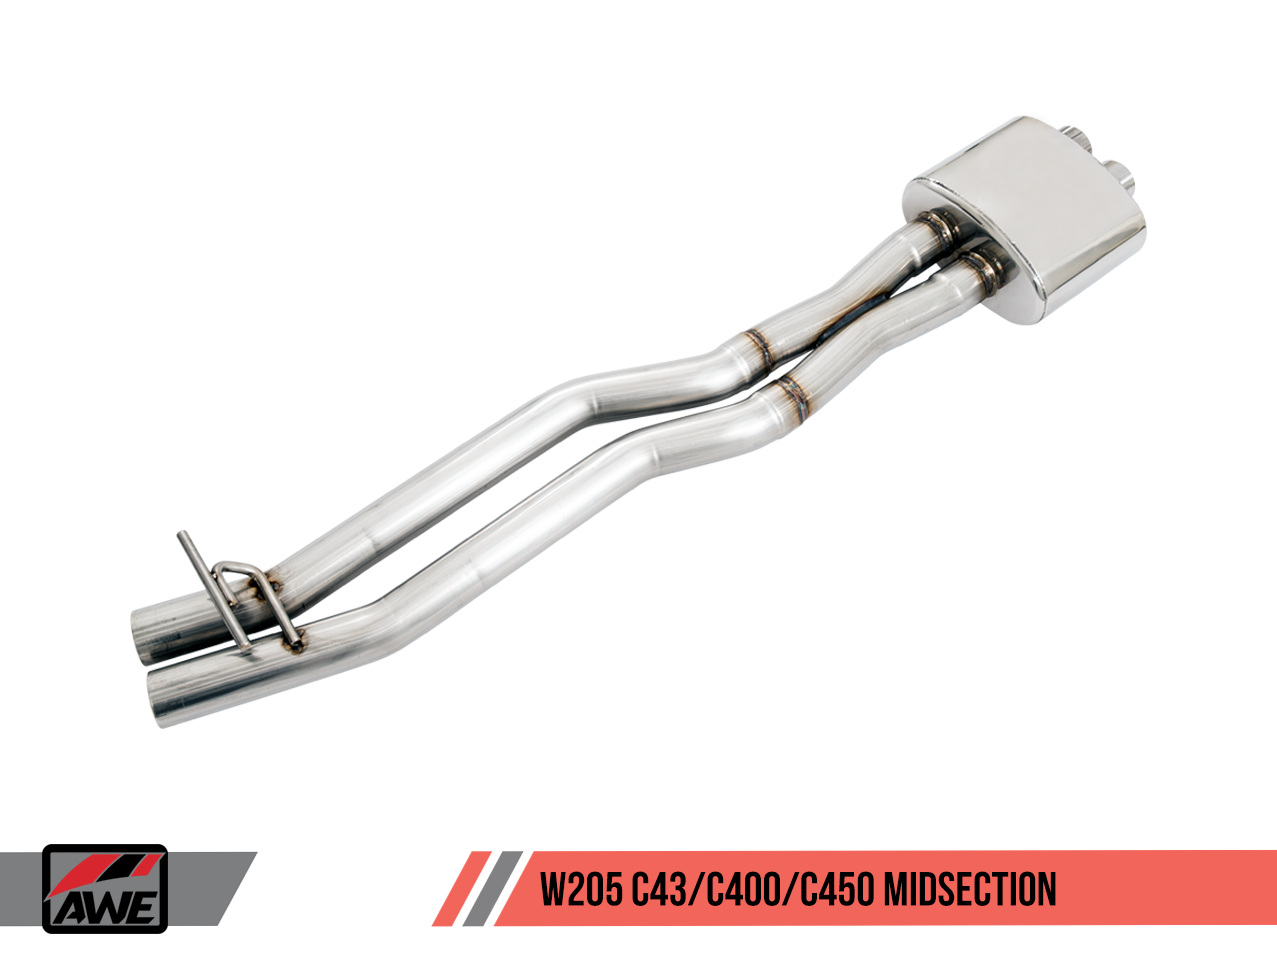 AWE Track Edition Exhaust for Mercedes-Benz W205 AMG C43 / C450 / C400